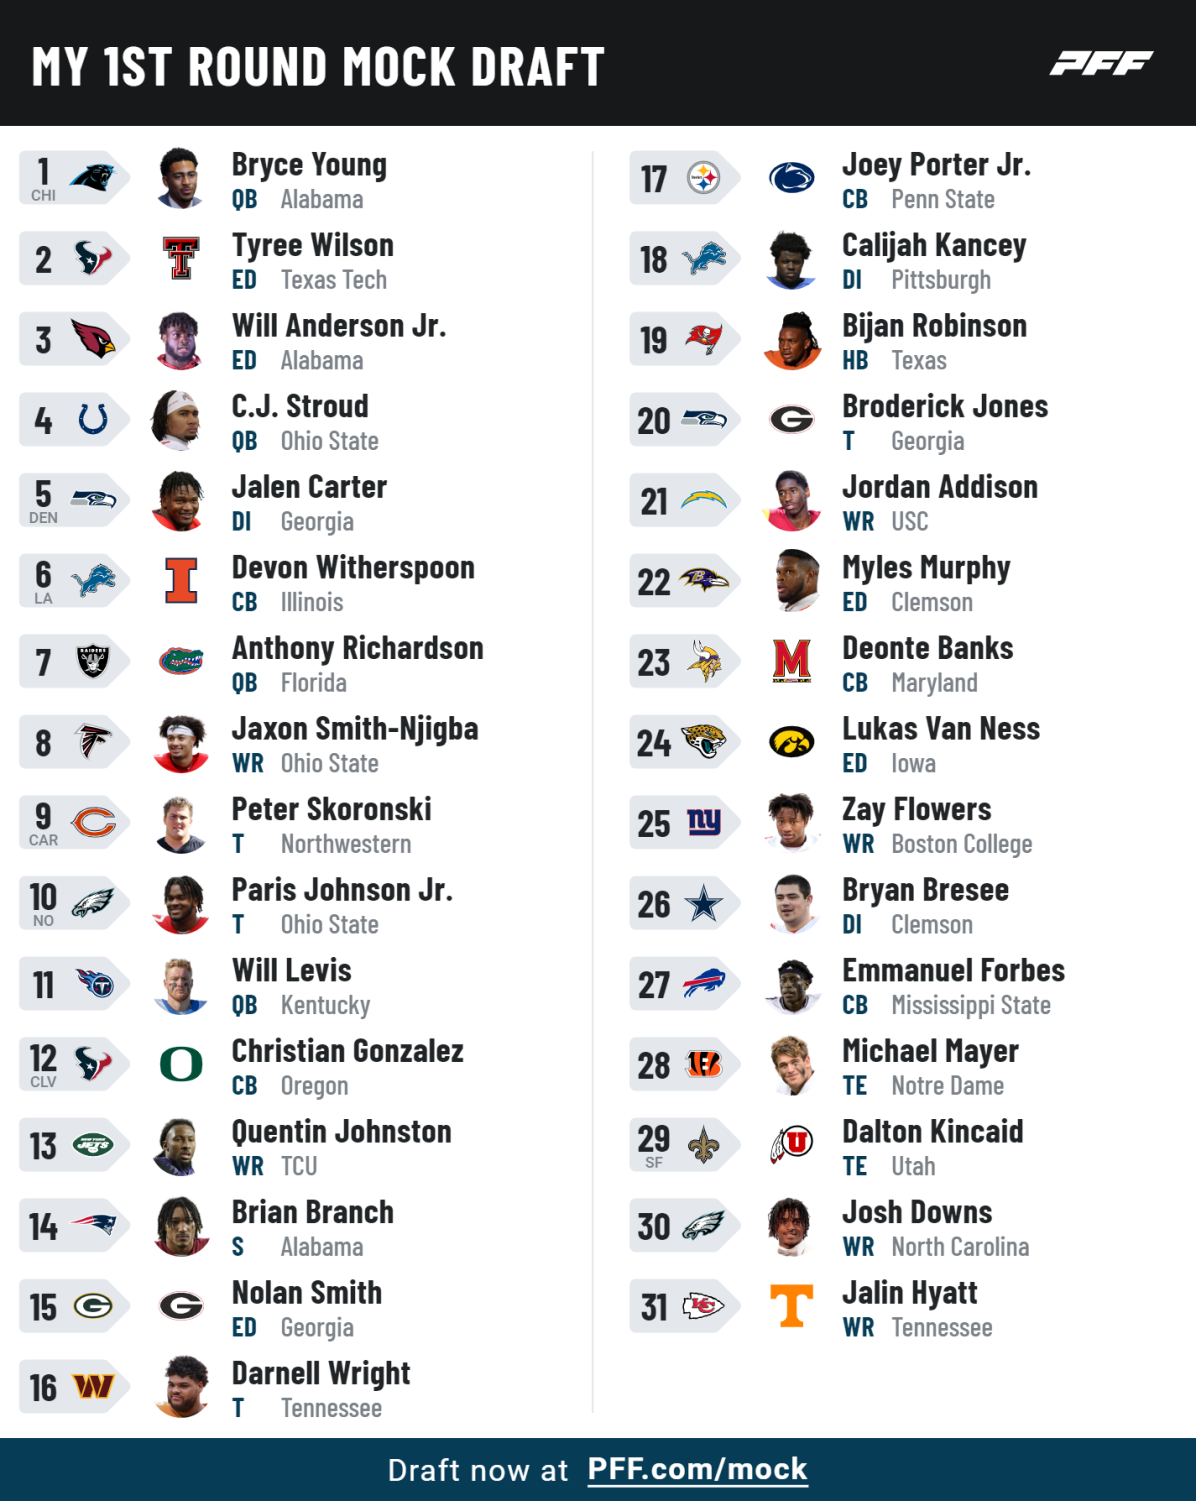 NFL Draft: 2022 NFL Mock Draft - New Names Enter The First Round - Visit NFL  Draft on Sports Illustrated, the latest news coverage, with rankings for NFL  Draft prospects, College Football